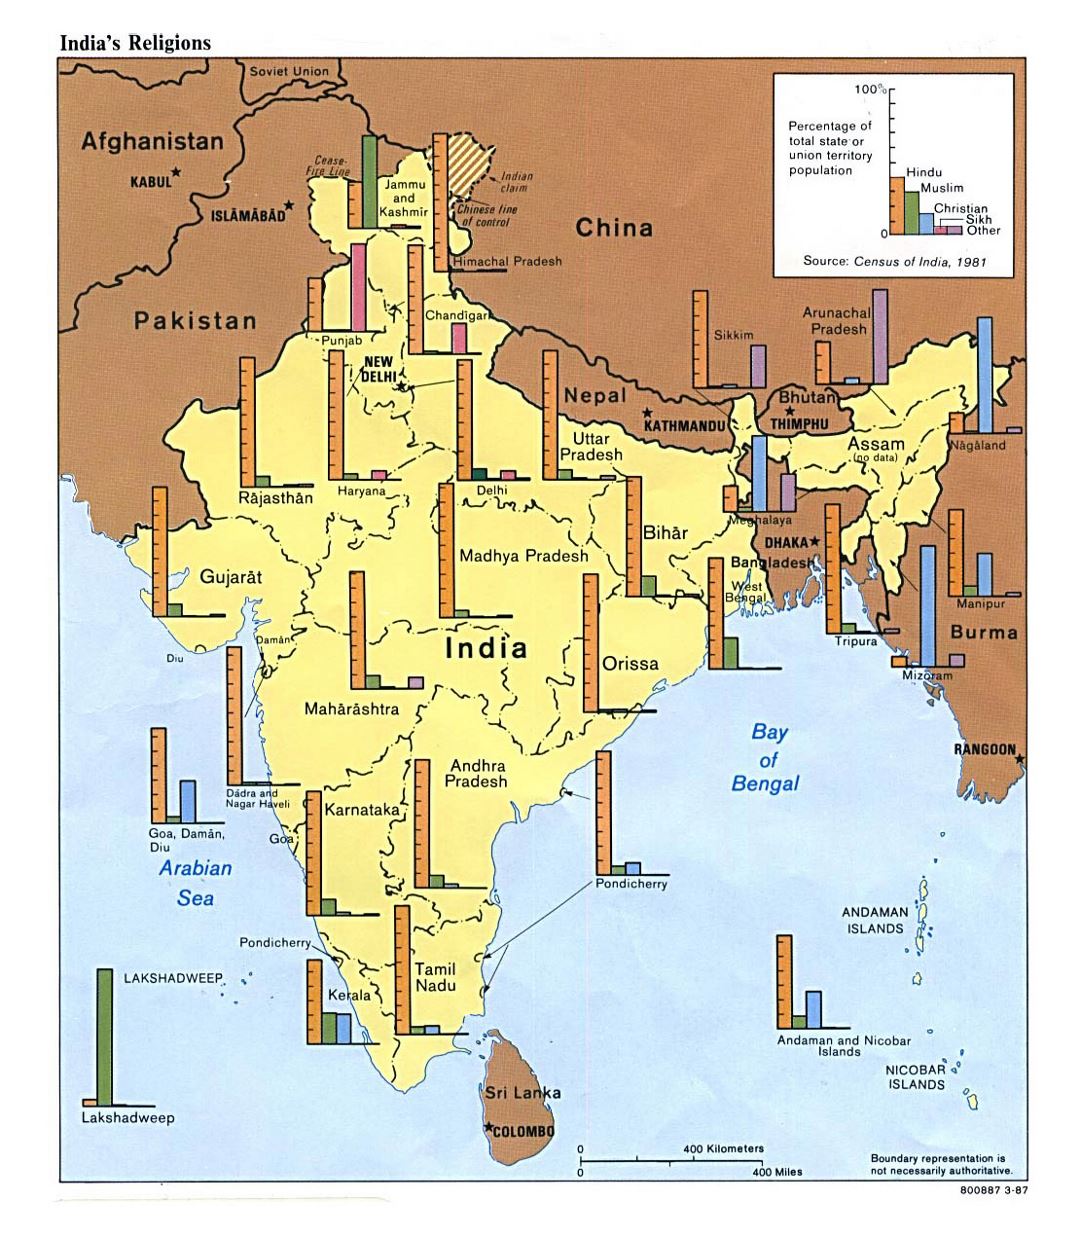 Detailed India religions map - 1987